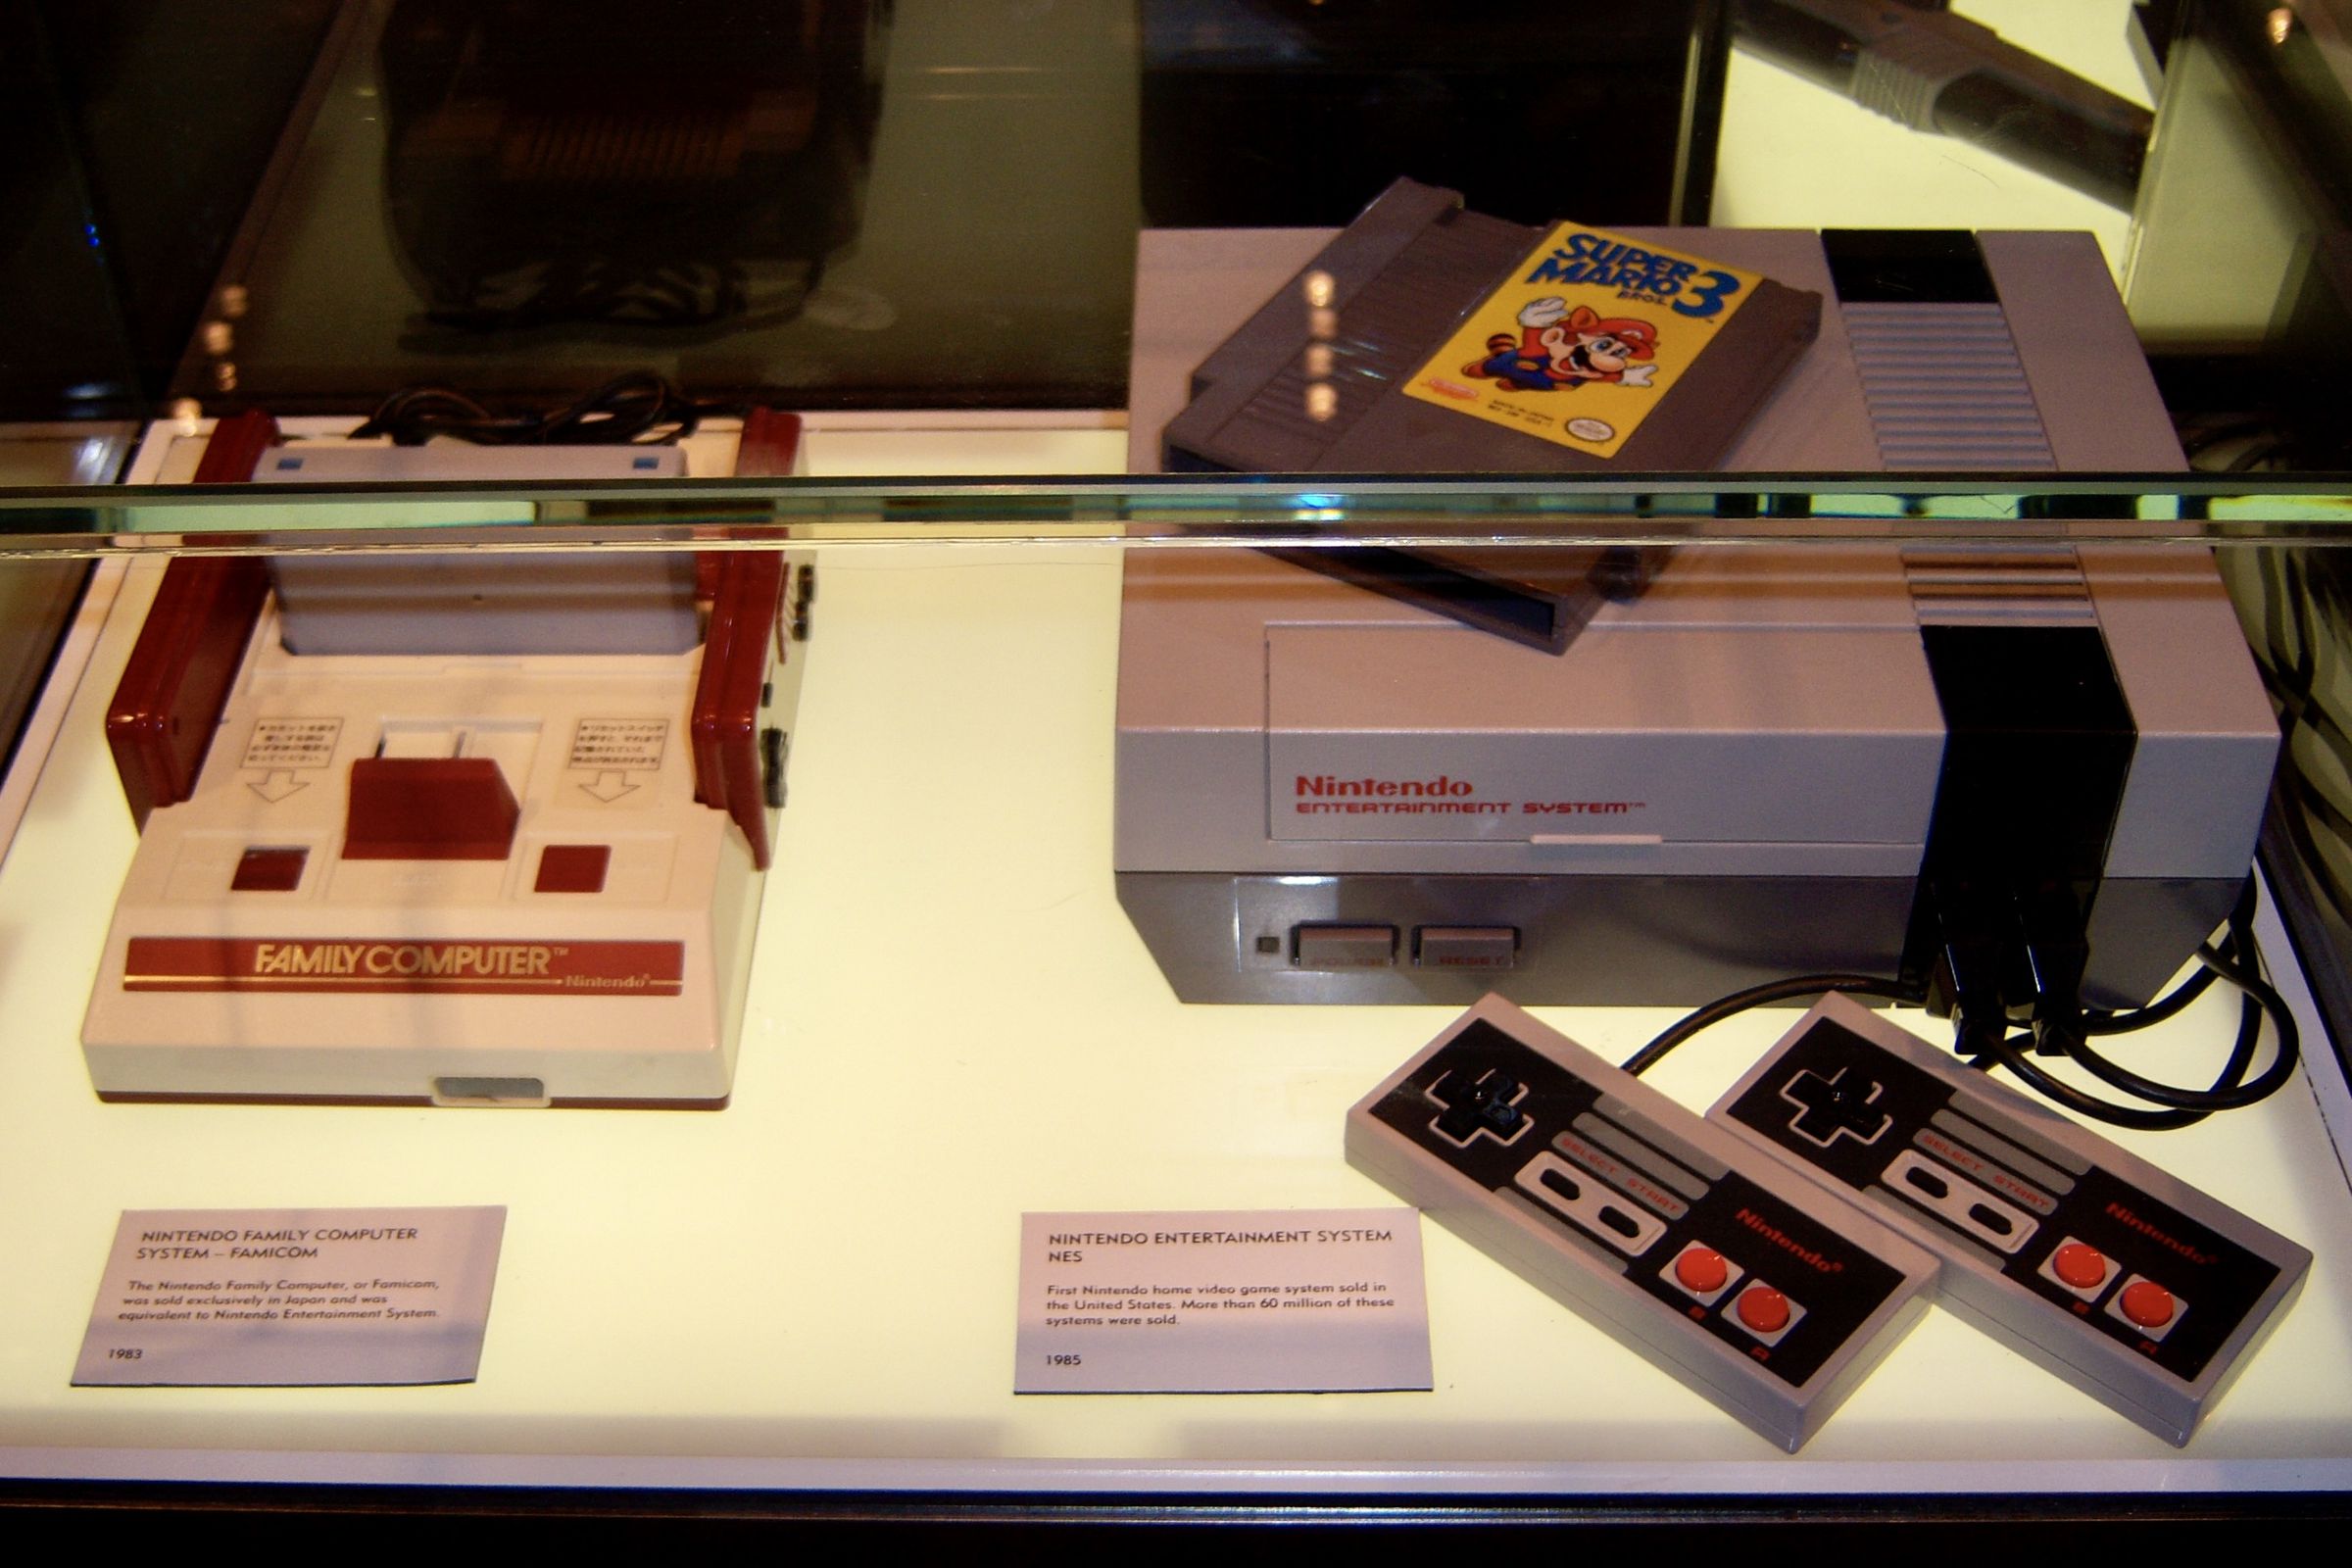 Nintendo world in NYC display for Nintendo Famicom and NES systems. There are two controllers hooked up to the NES and a Mario Bros. 3 cartridge on top.